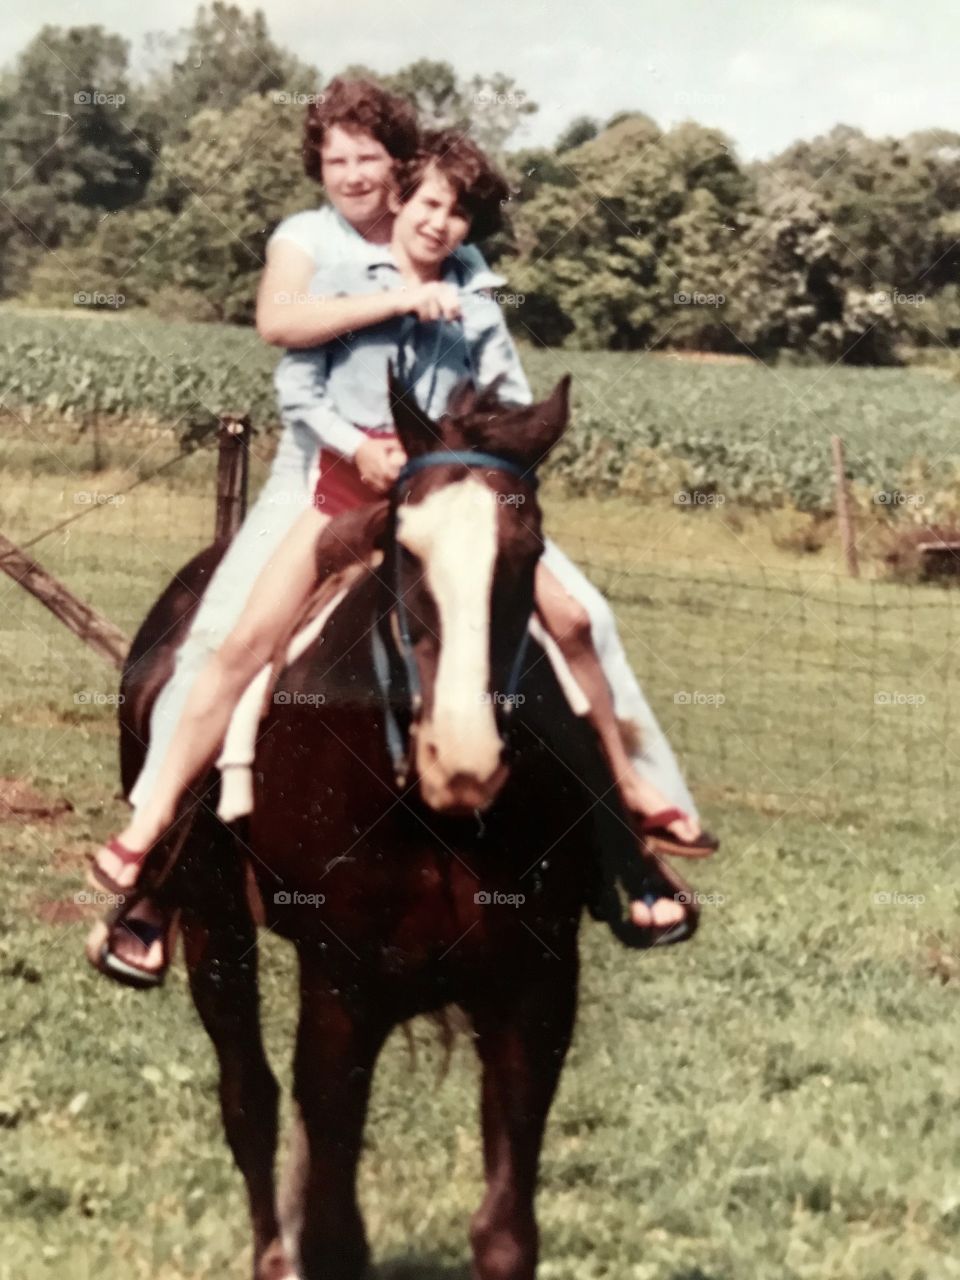 Sweet sisters love to ride family horse!!